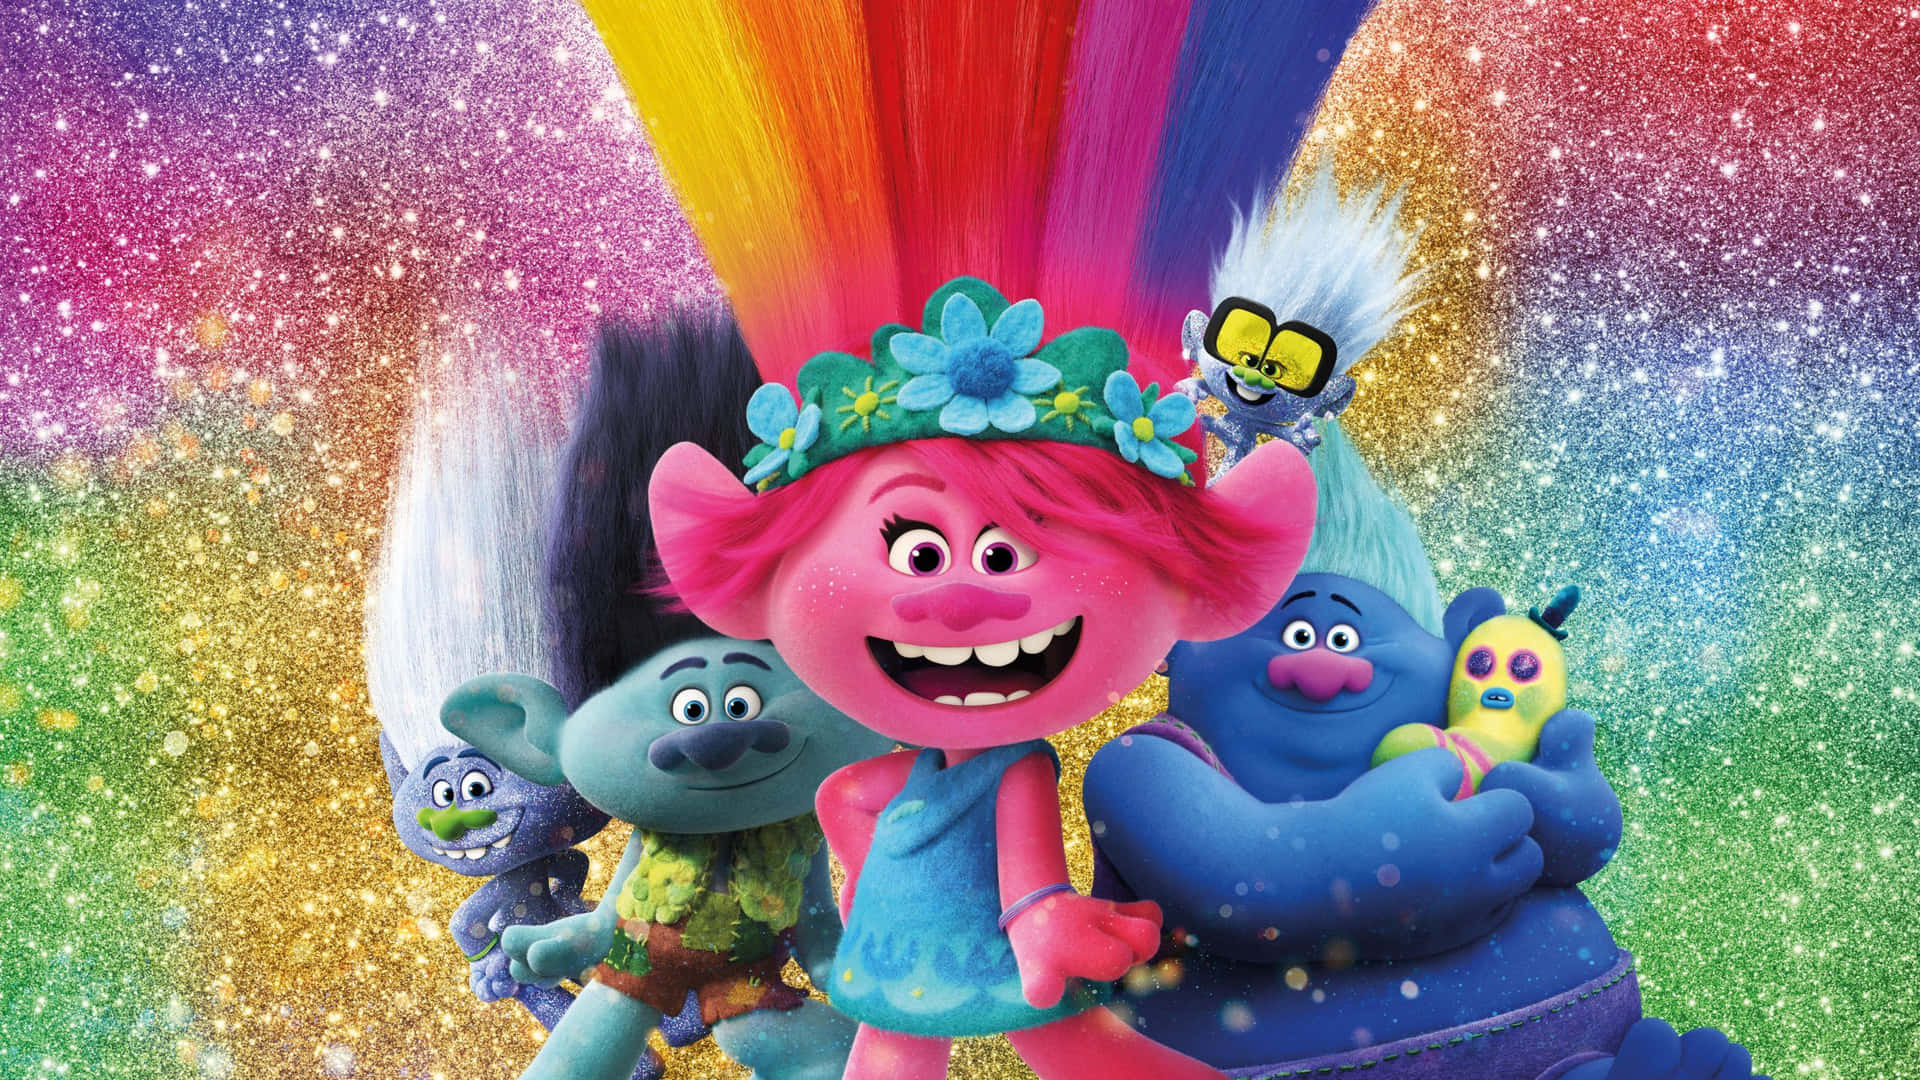 The Adventure Continues in Trolls World Tour Wallpaper